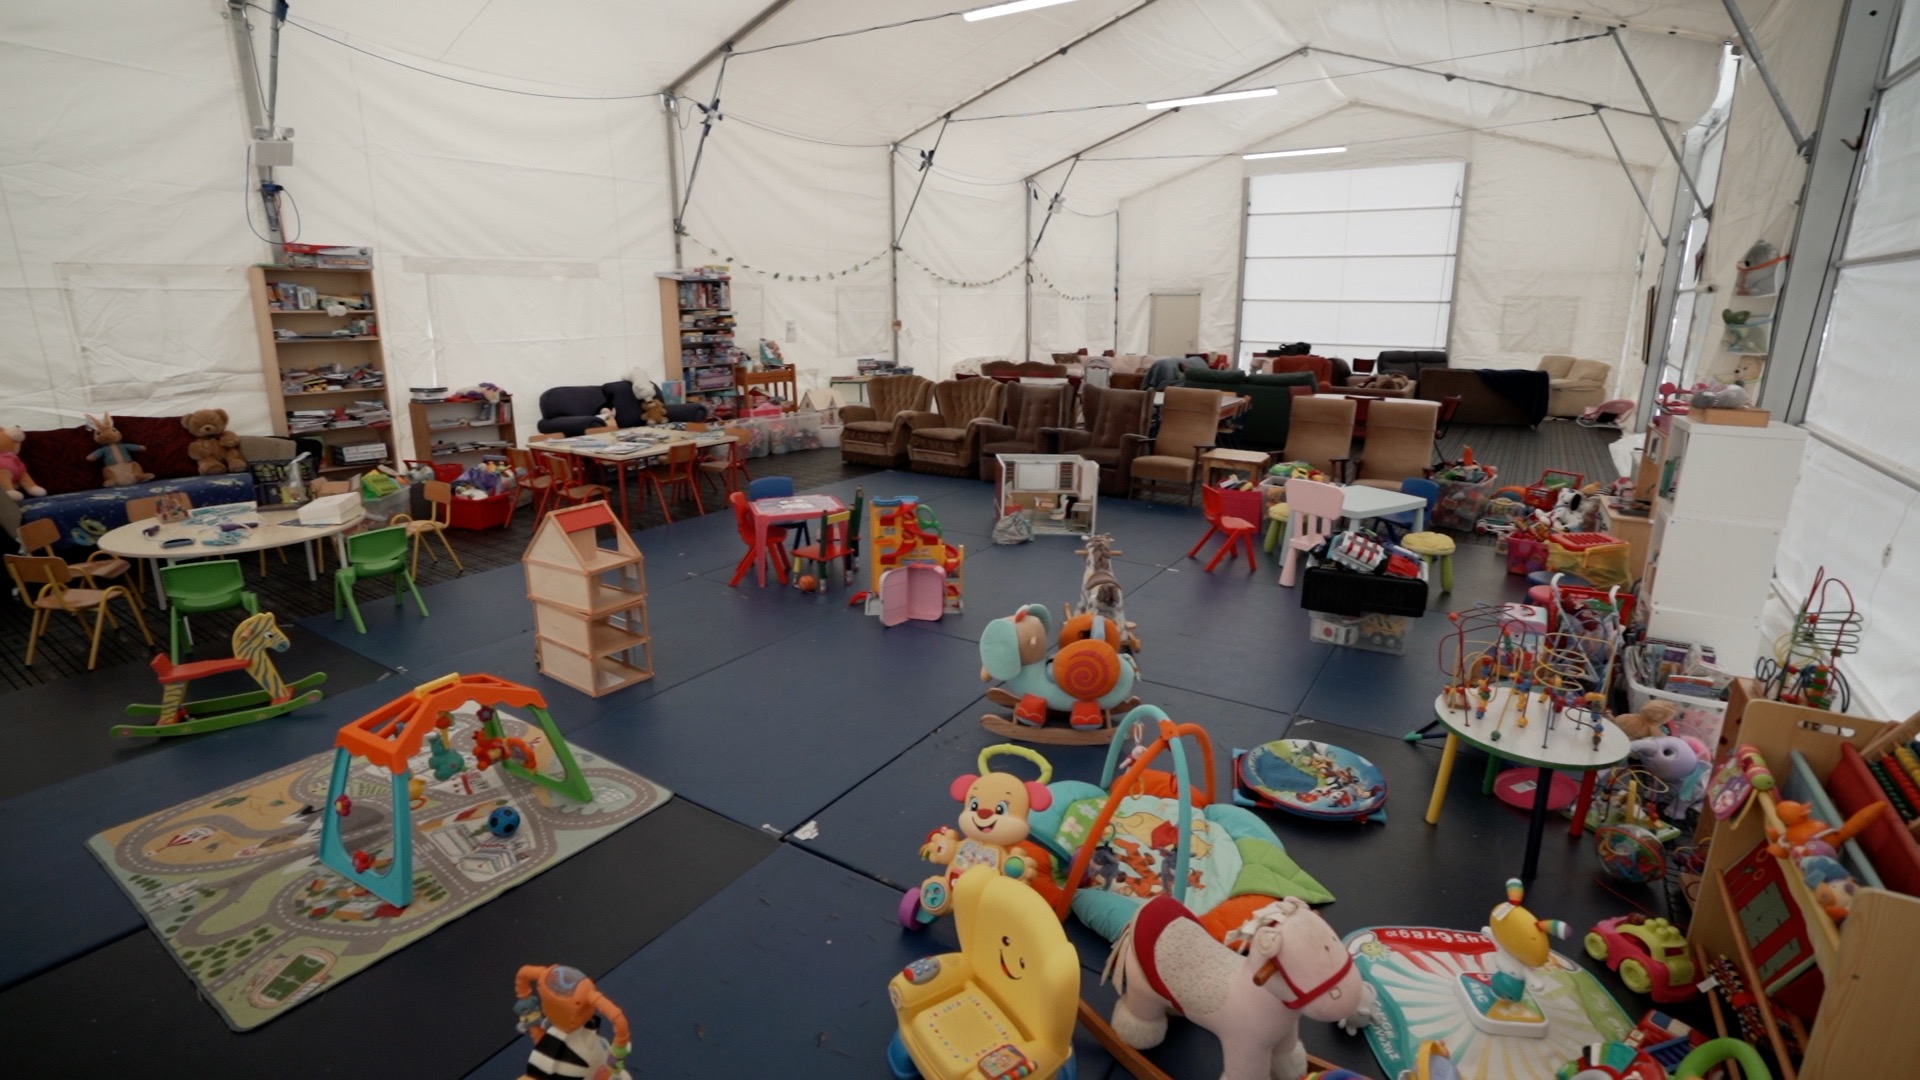 A child’s play area at Gormanston Army Camp. Image: Department of Taoiseach.